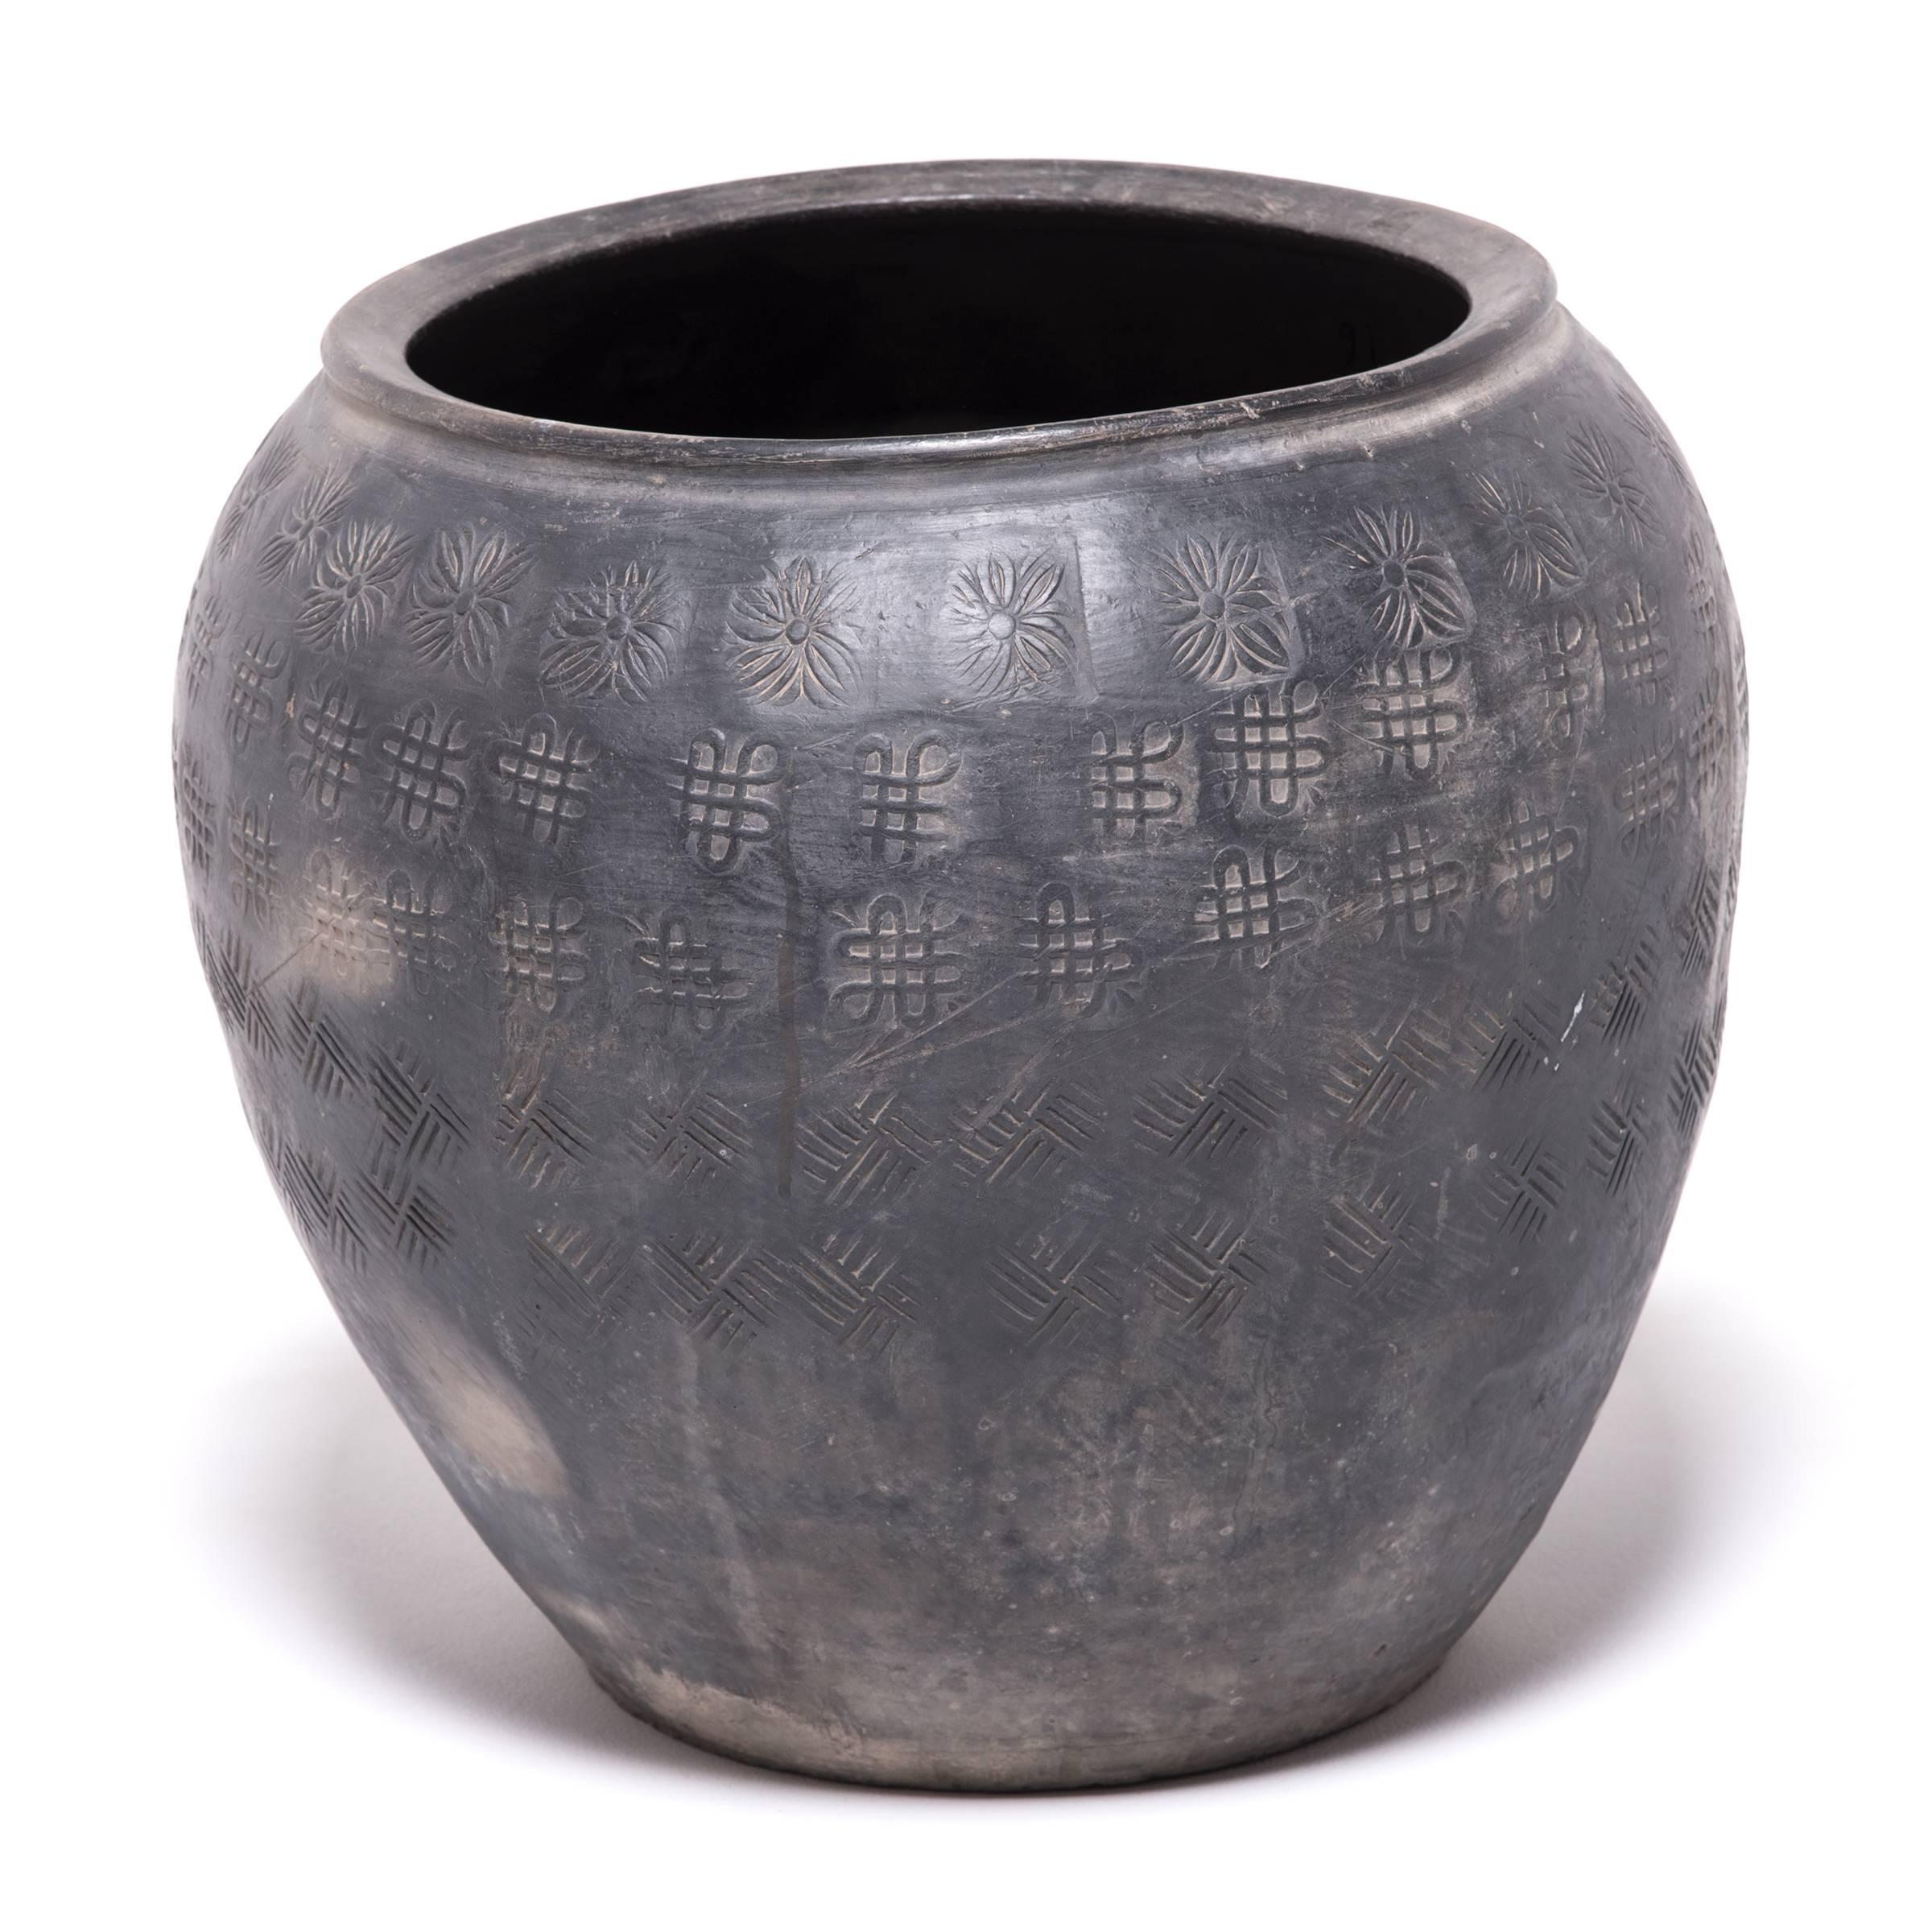 Over a century ago, a gifted potter from northern China crafted this organic clay jar out of rich dark river clay mined from the river basins of Asia. The surface is stamped with auspicious symbols: The Tibetan Buddhist endless knot, and the peony,